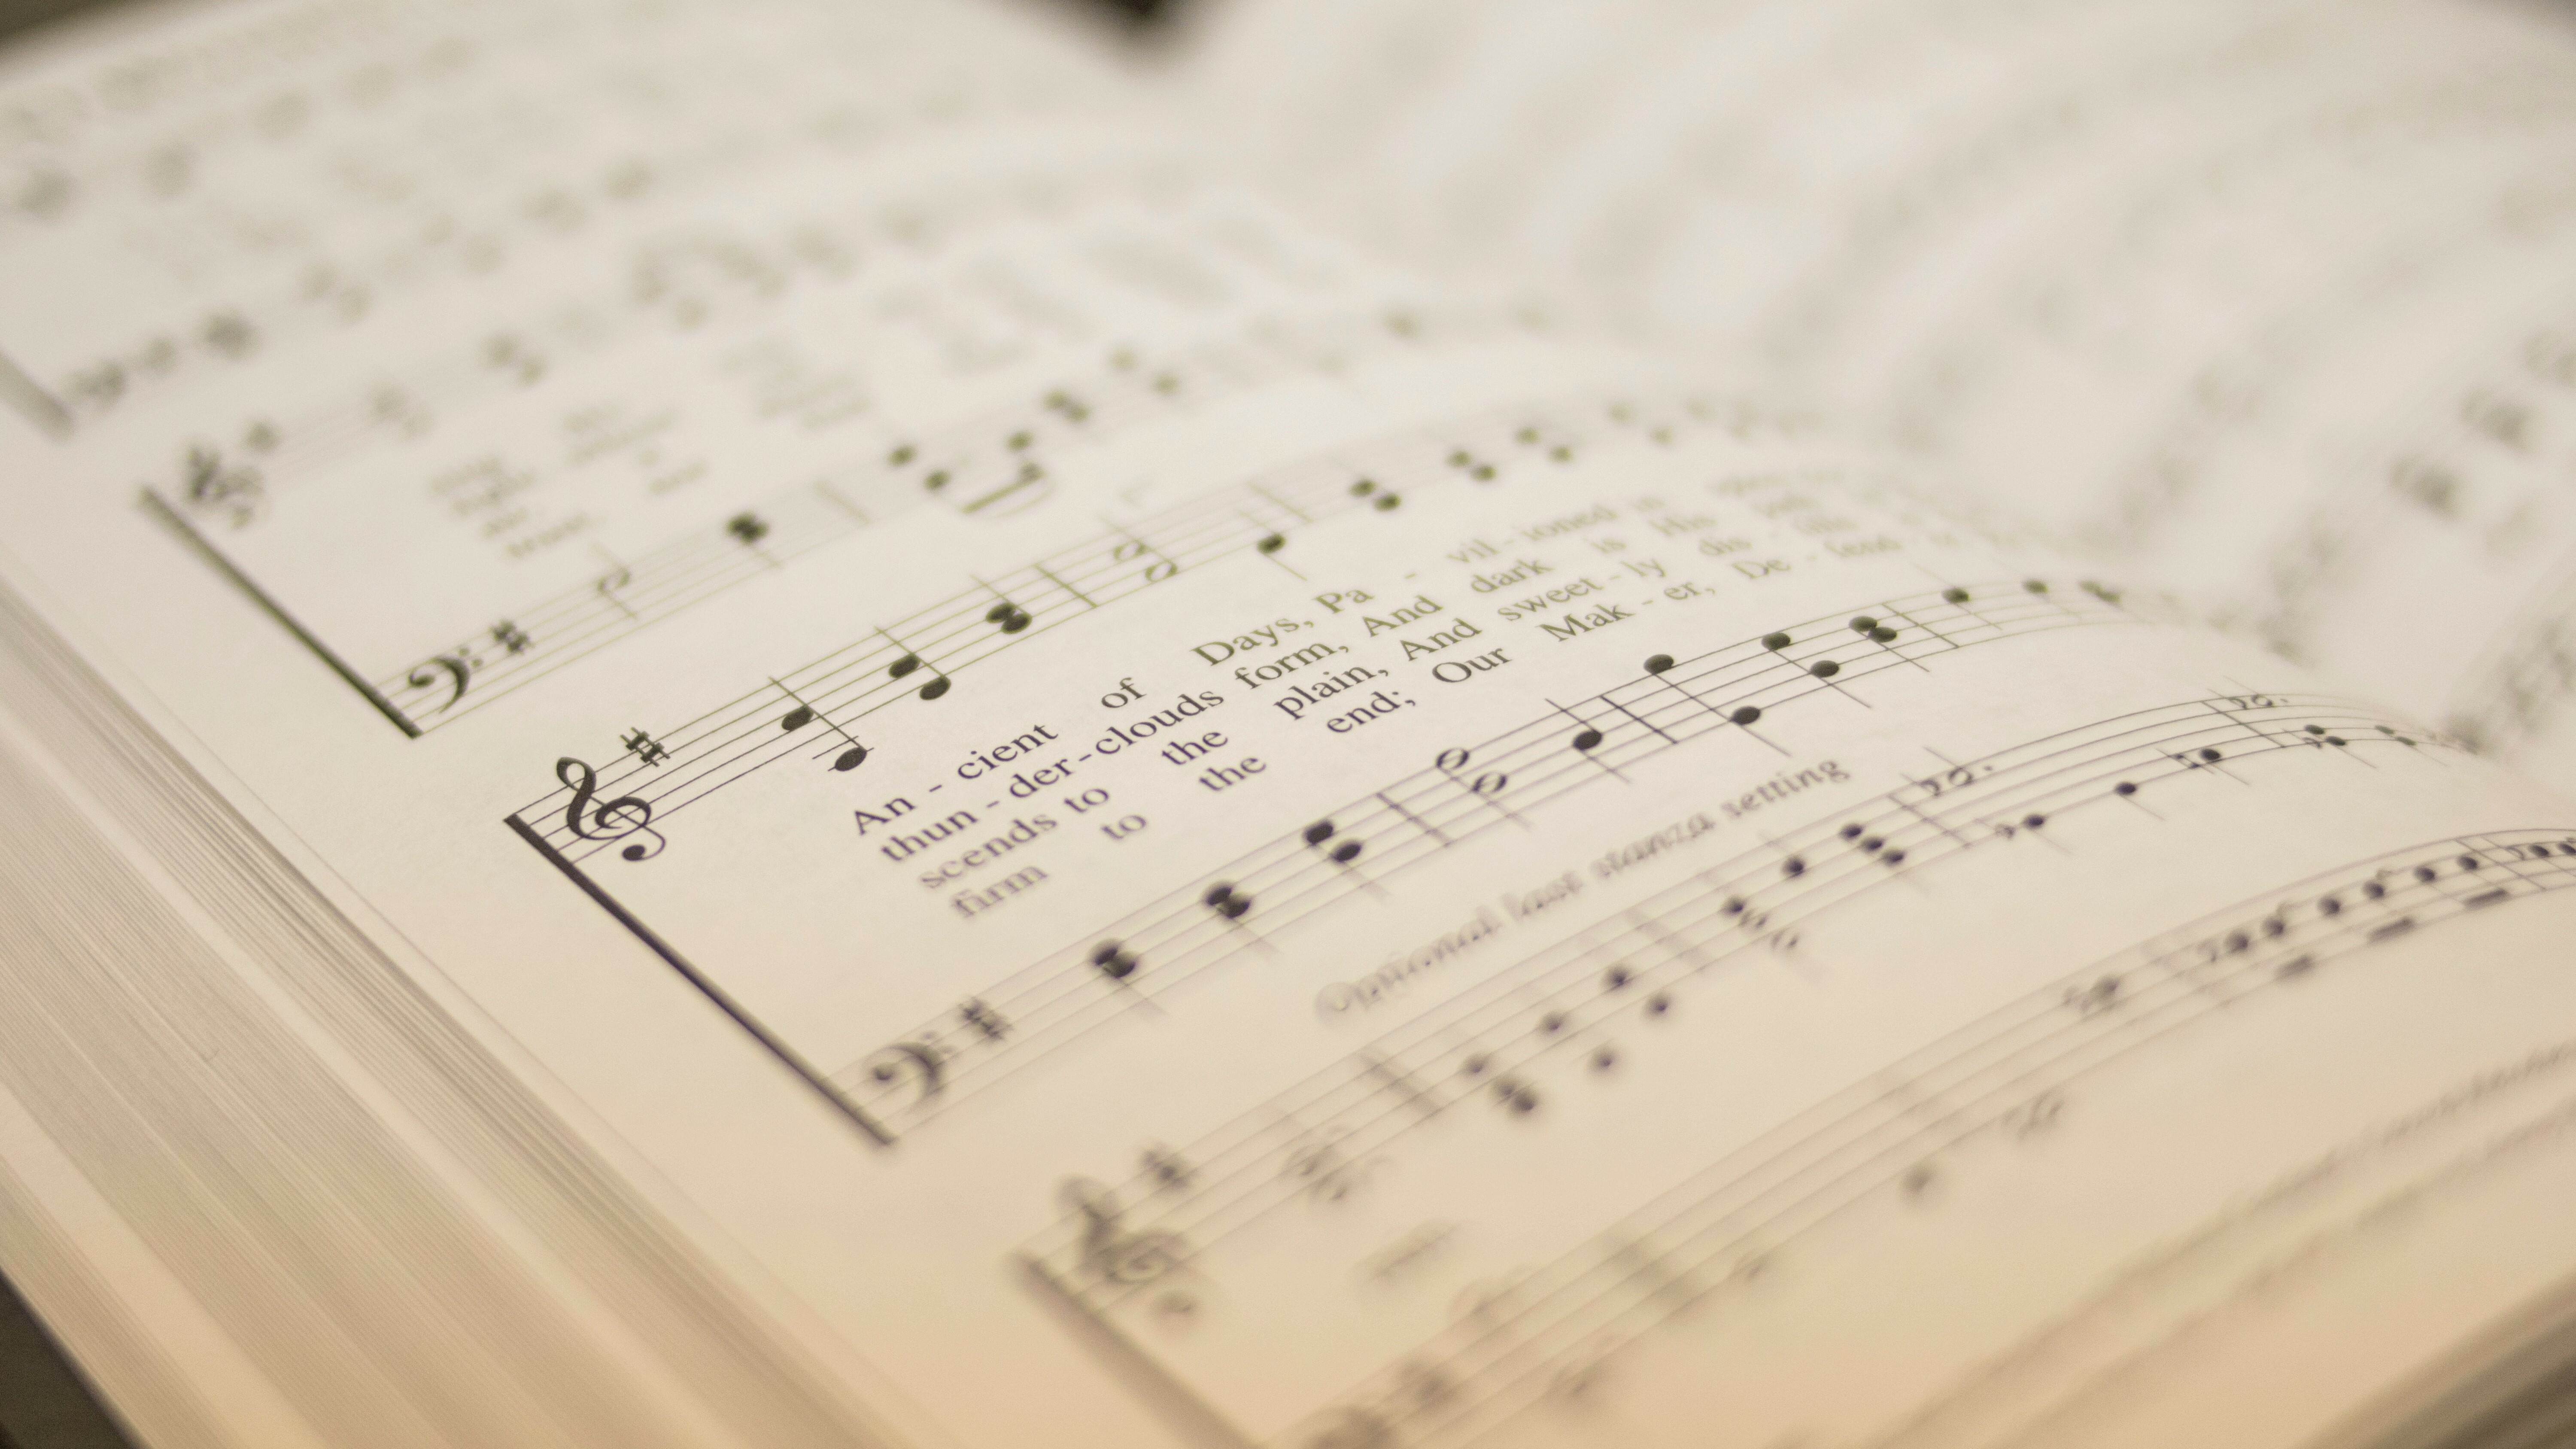 Liturgy 101: One of My Favorite Hymns